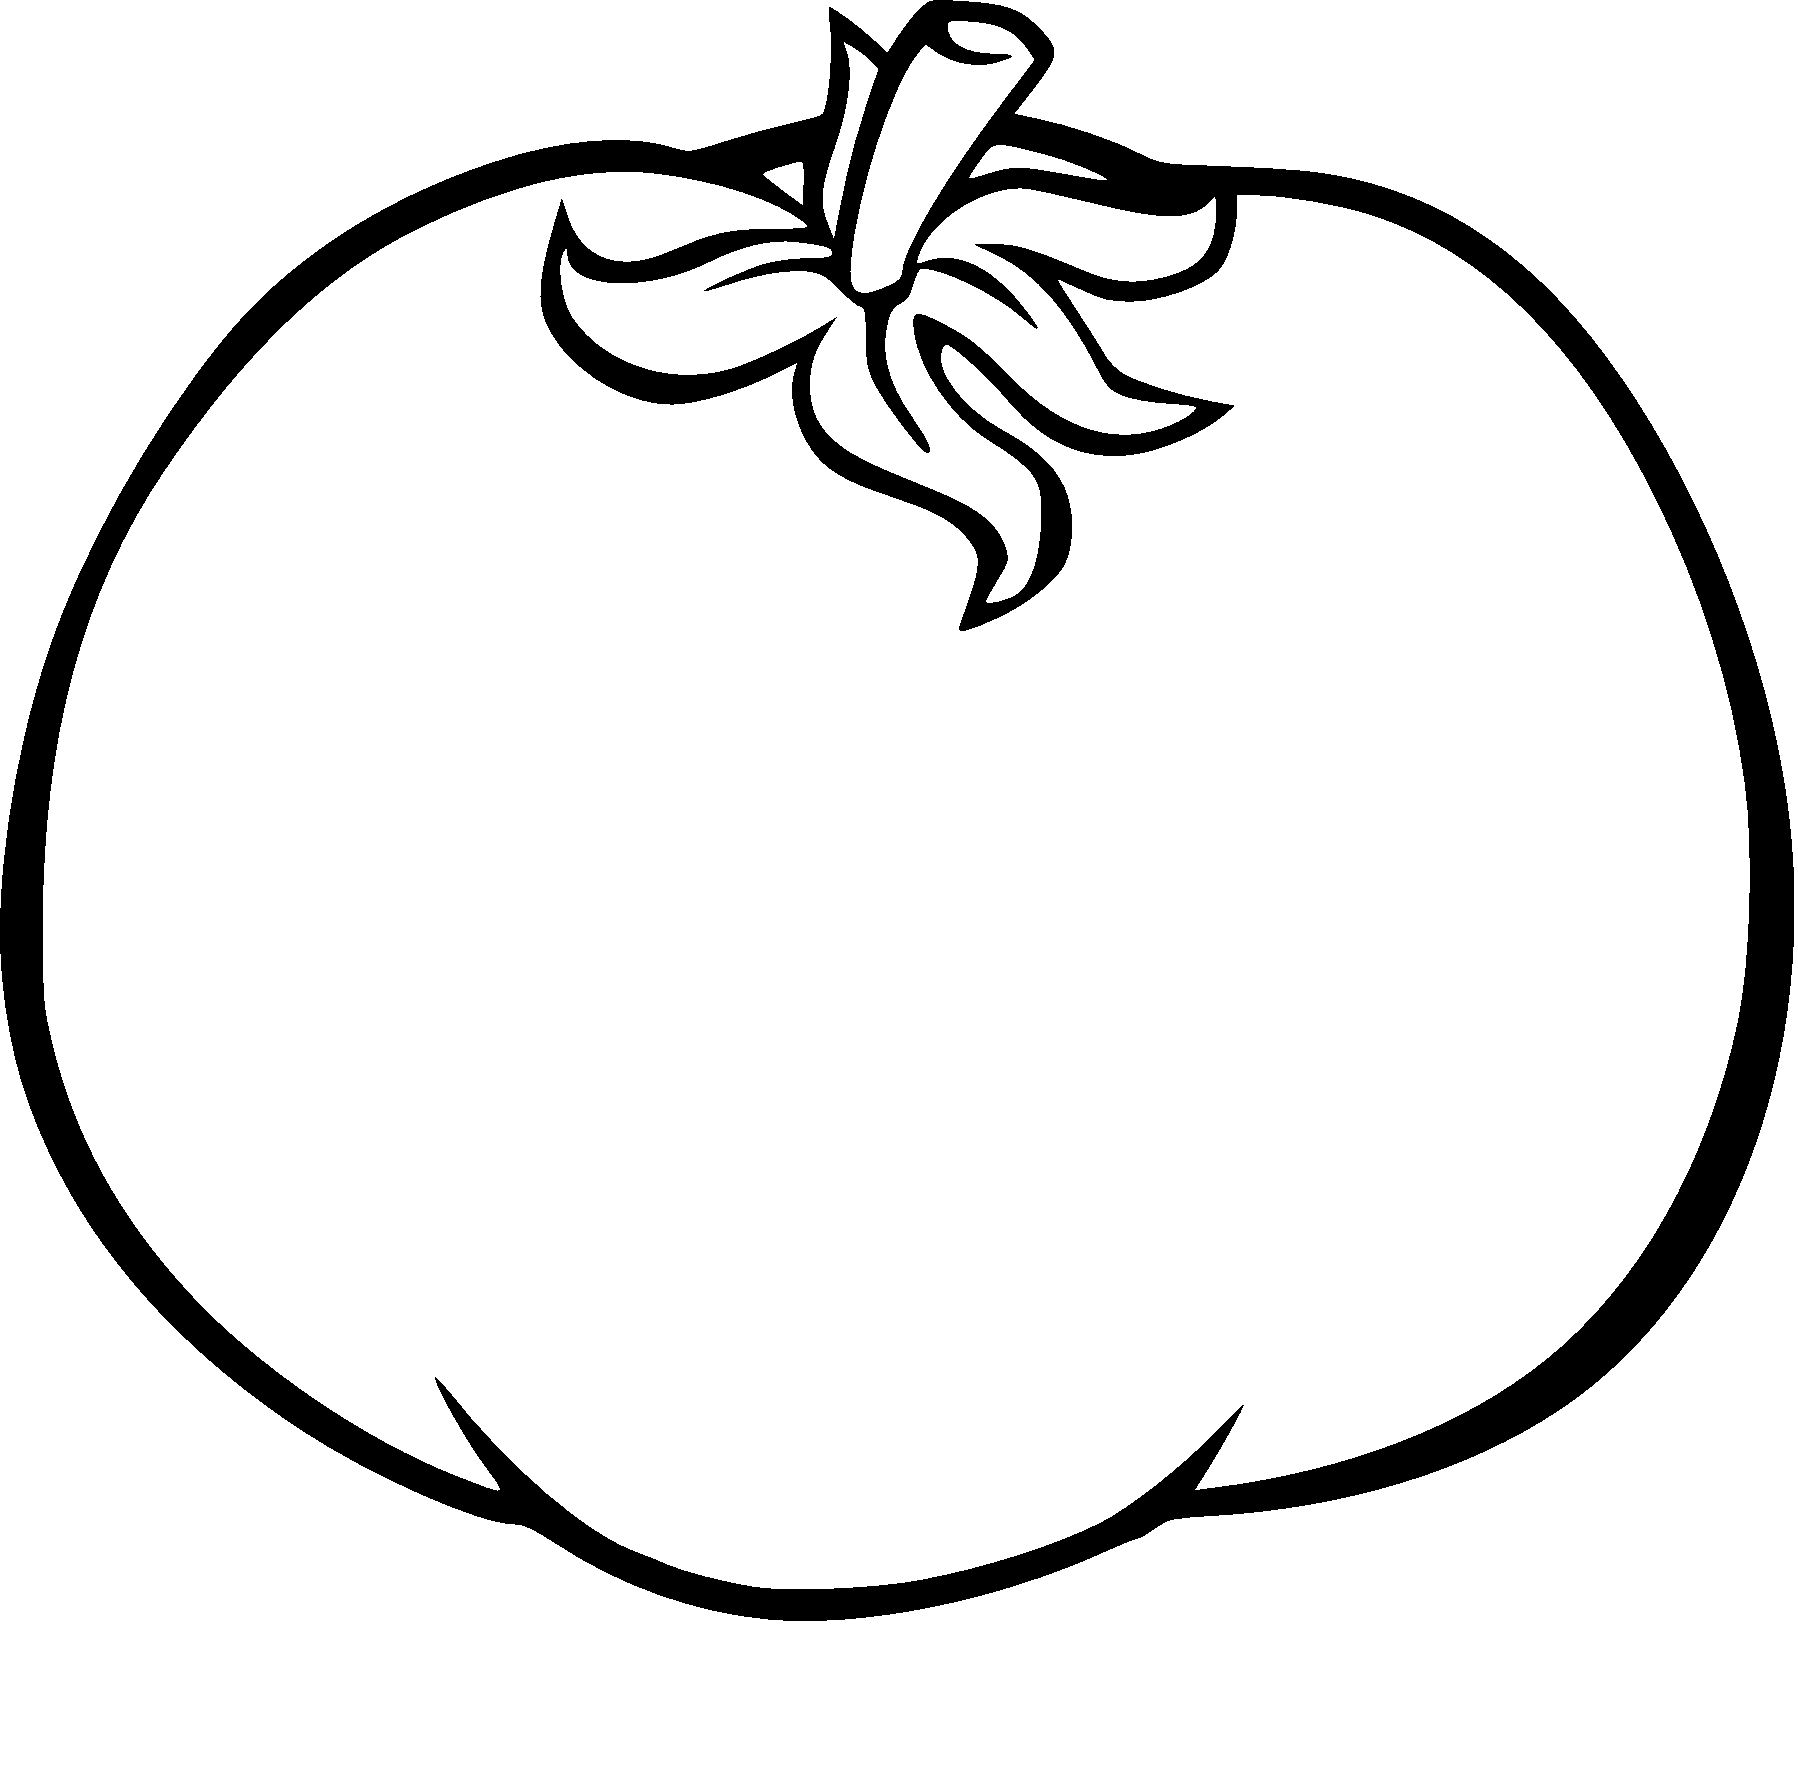 Tomato drawing and coloring page